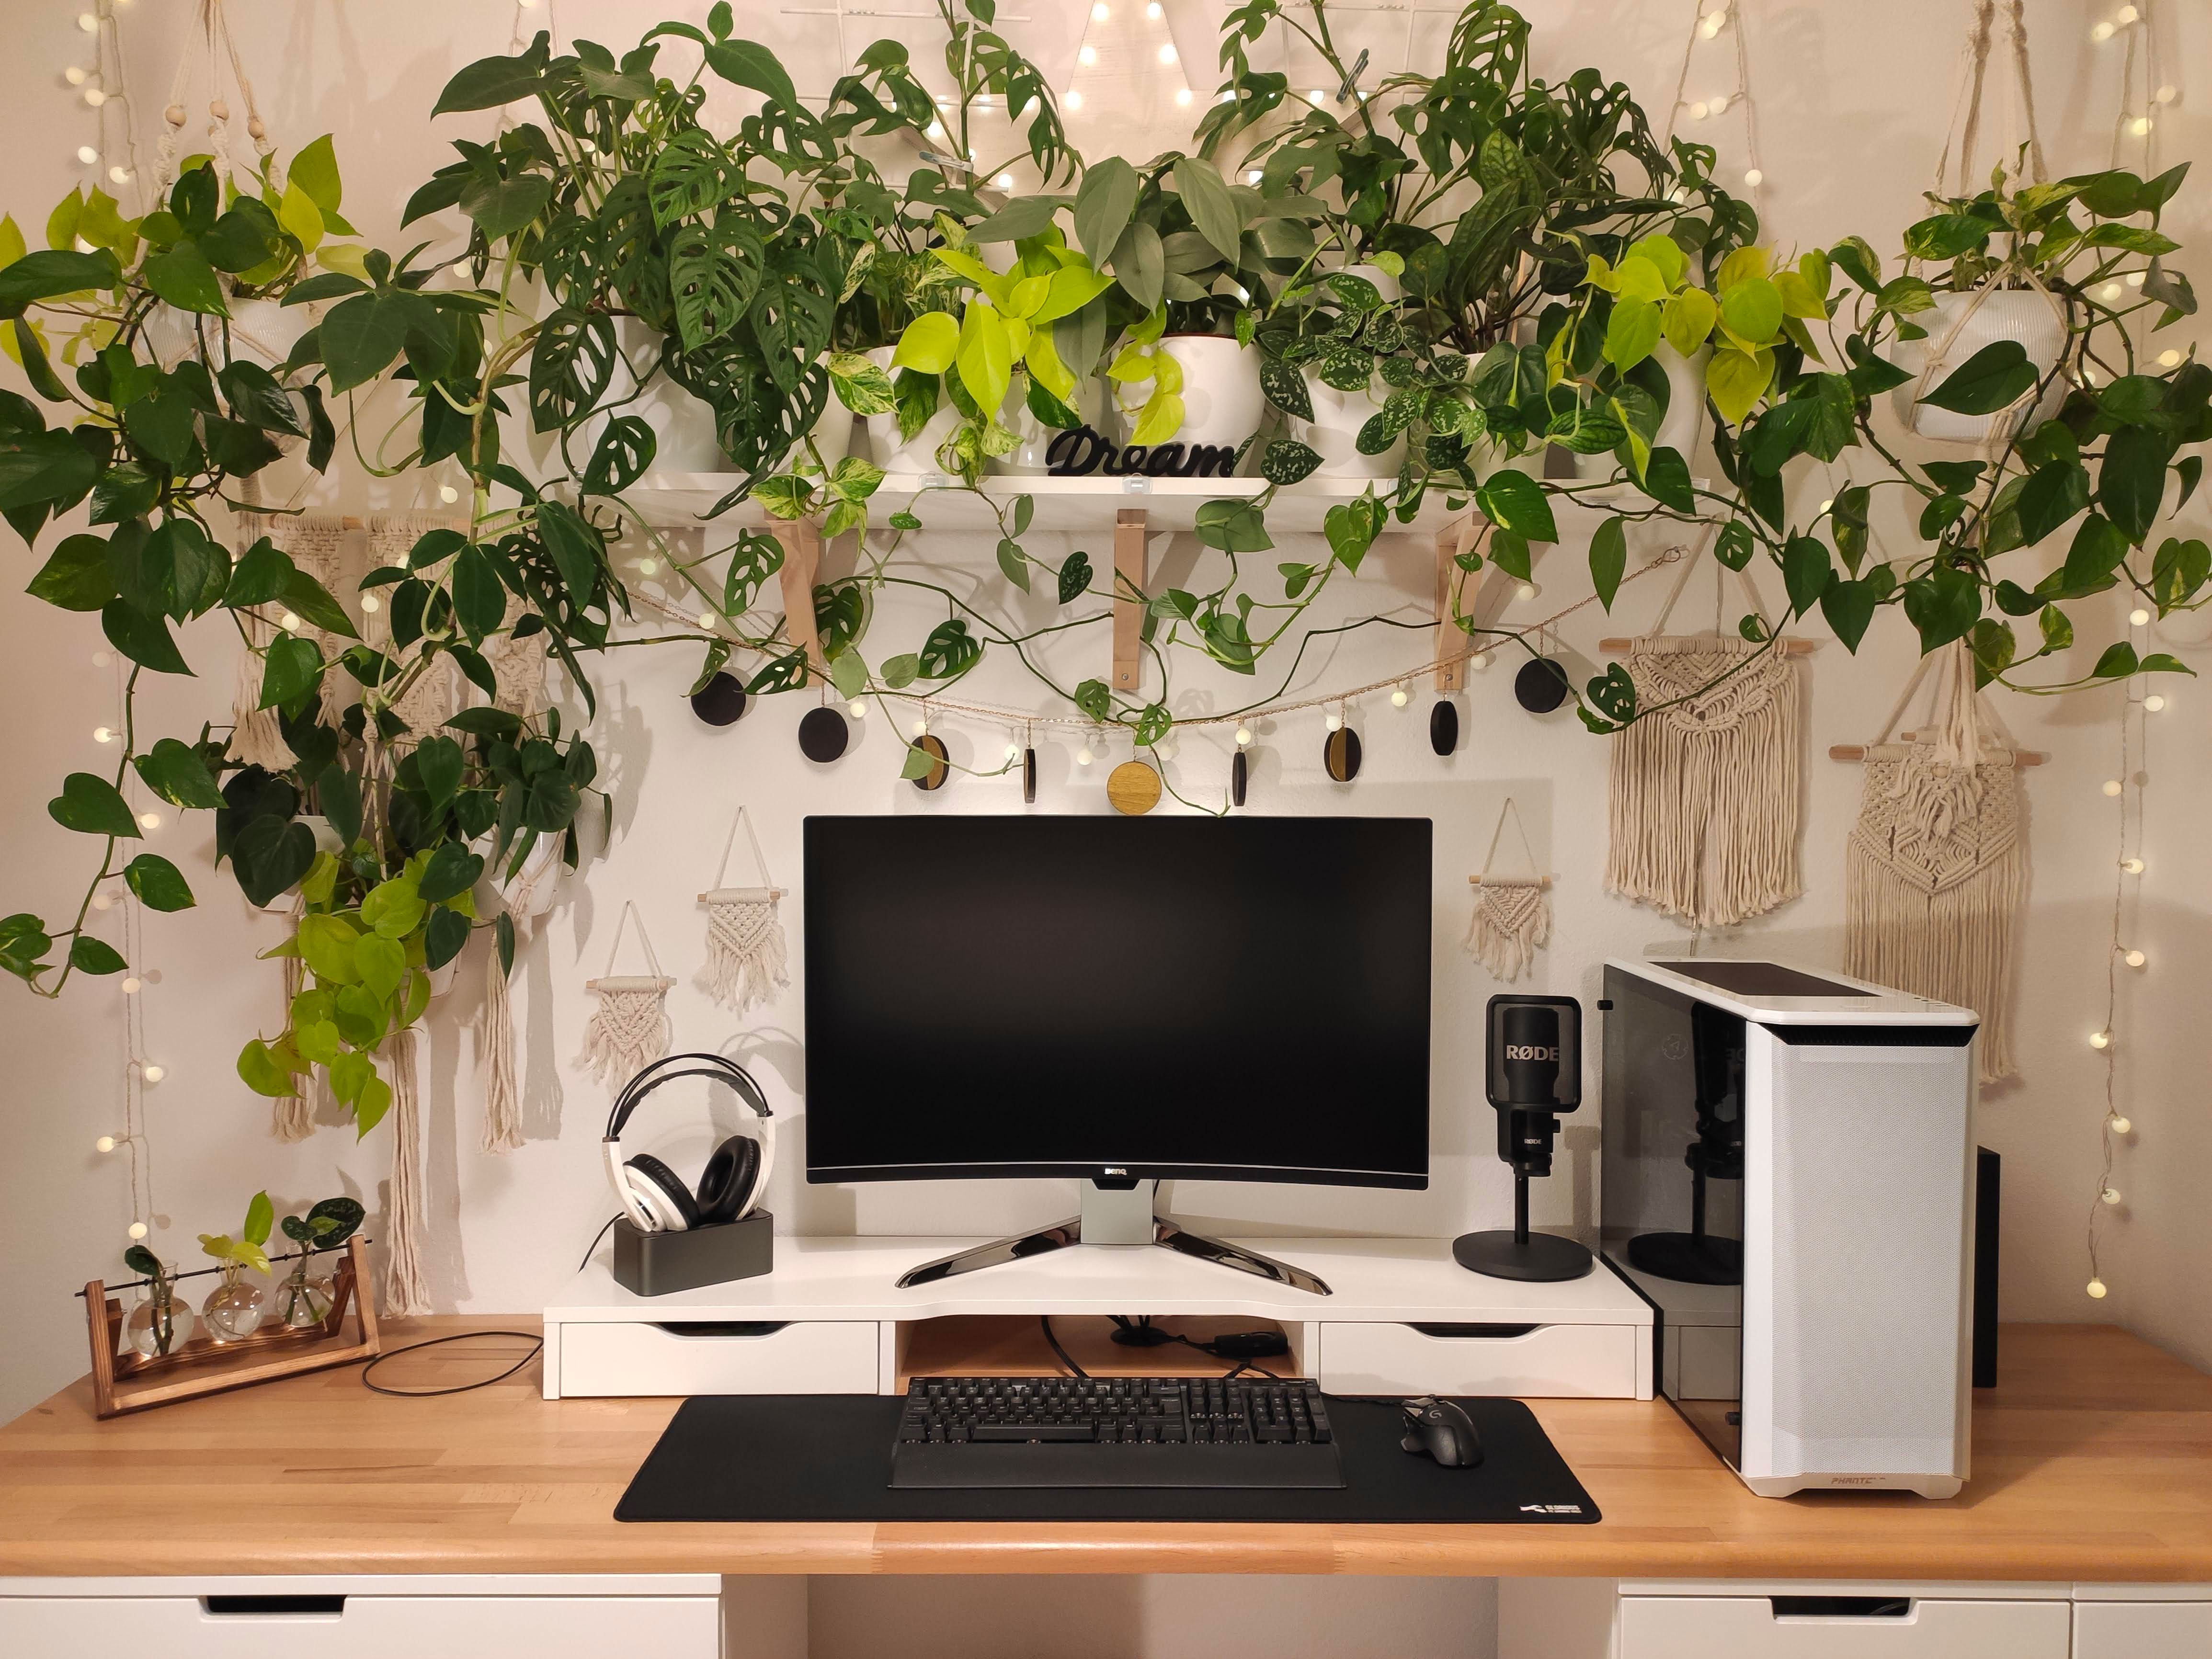 A lot of green plants around the monitor